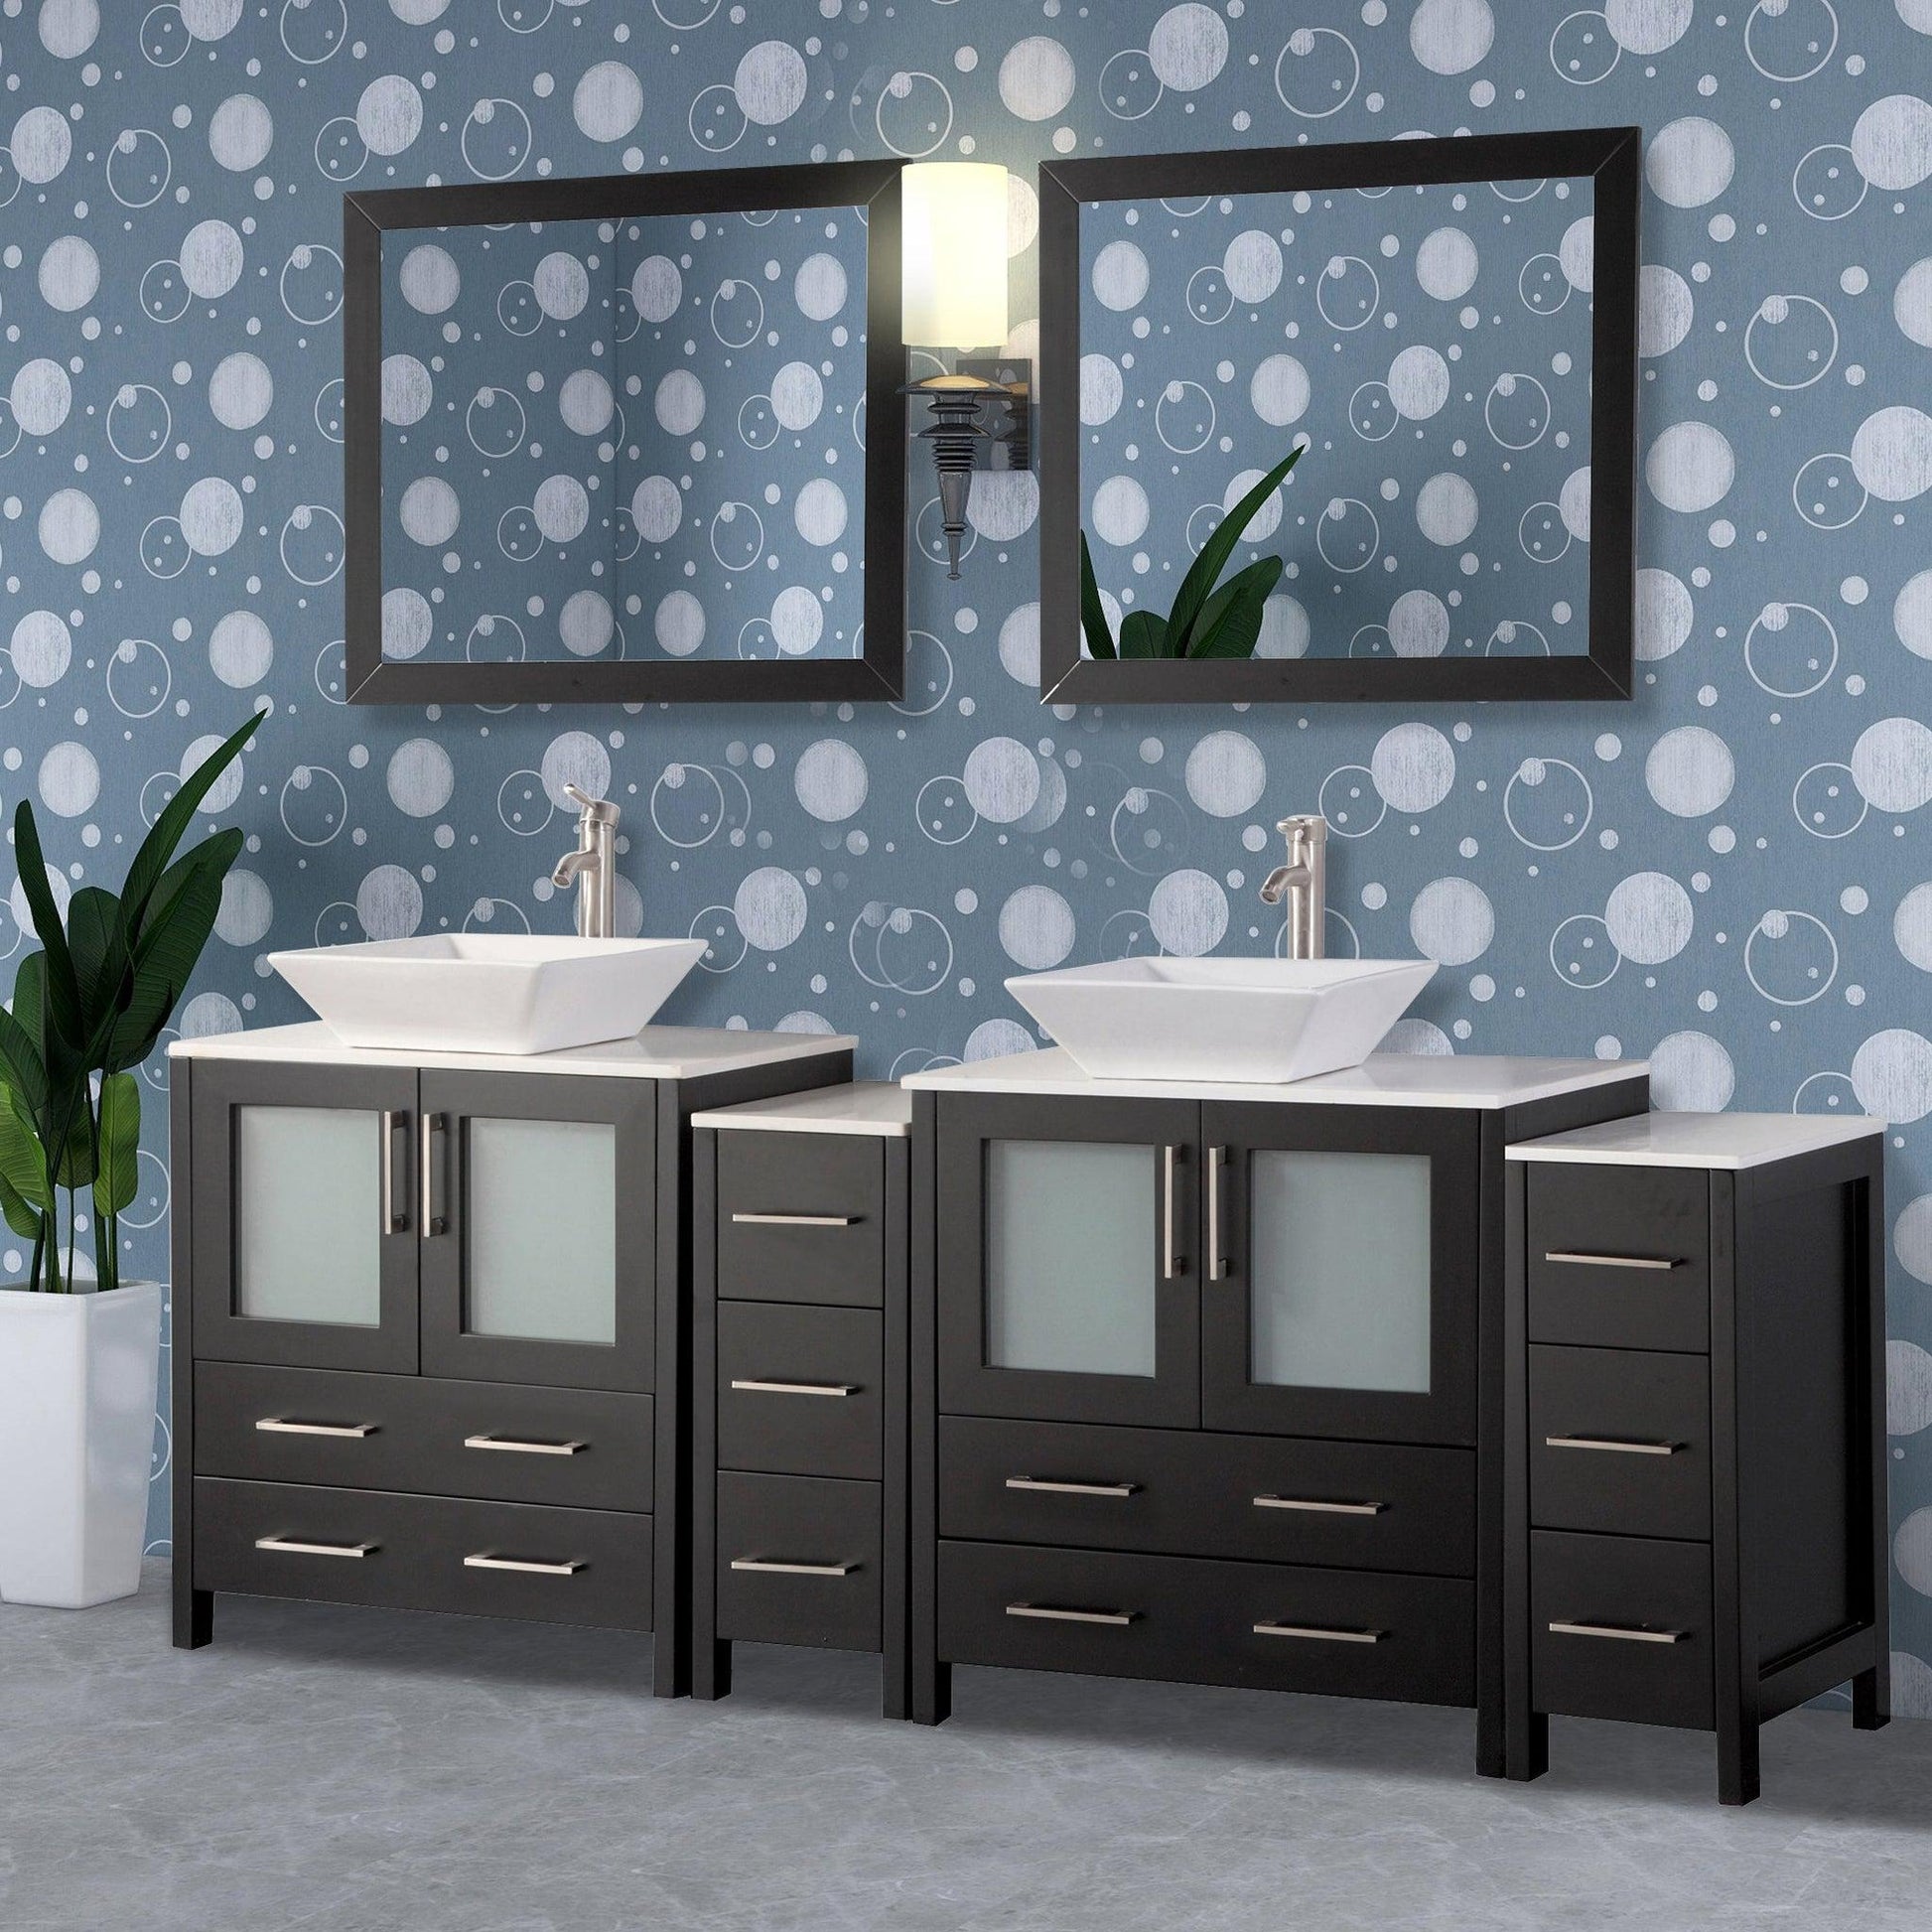 Vanity Art Ravenna 84" Double Espresso Freestanding Vanity Set With White Engineered Marble Top, 2 Ceramic Vessel Sinks, 2 Side Cabinets and 2 Mirrors